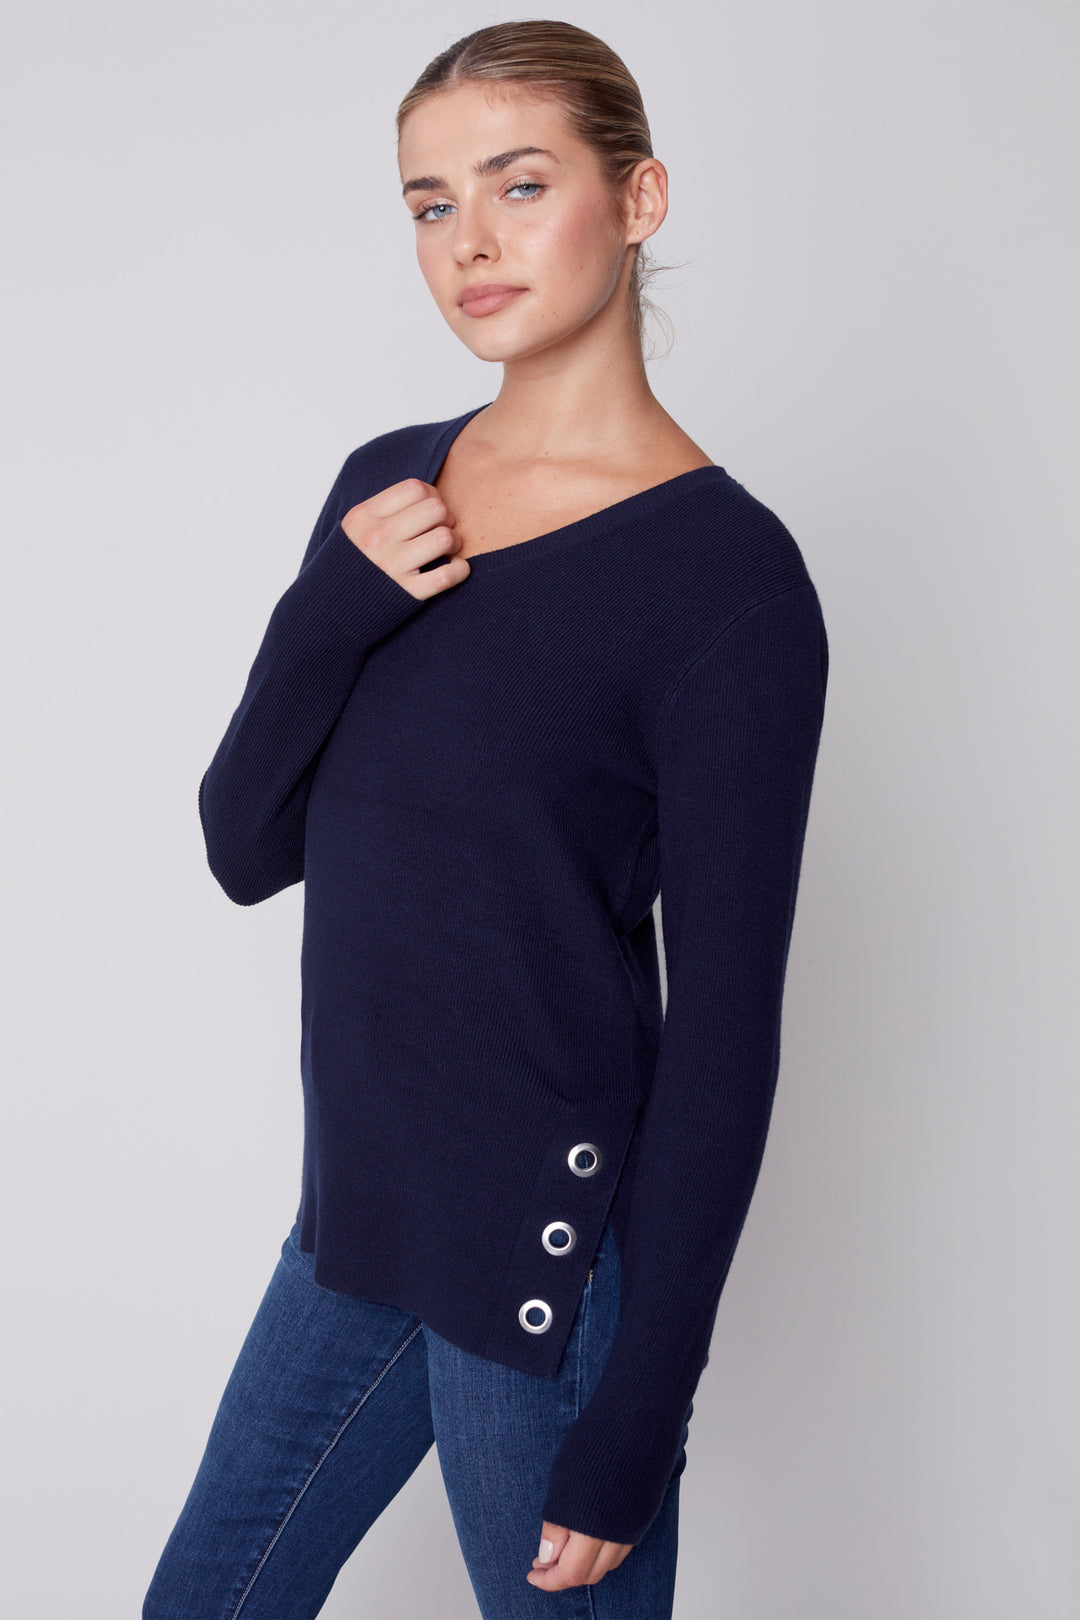 Stay cozy yet look stylish with this V-neck top with grommets! The plushy knit and grommet detail combine to create an elegant, solid look that will take any outfit up a notch. Look fashionable while feeling comfortable all day long!